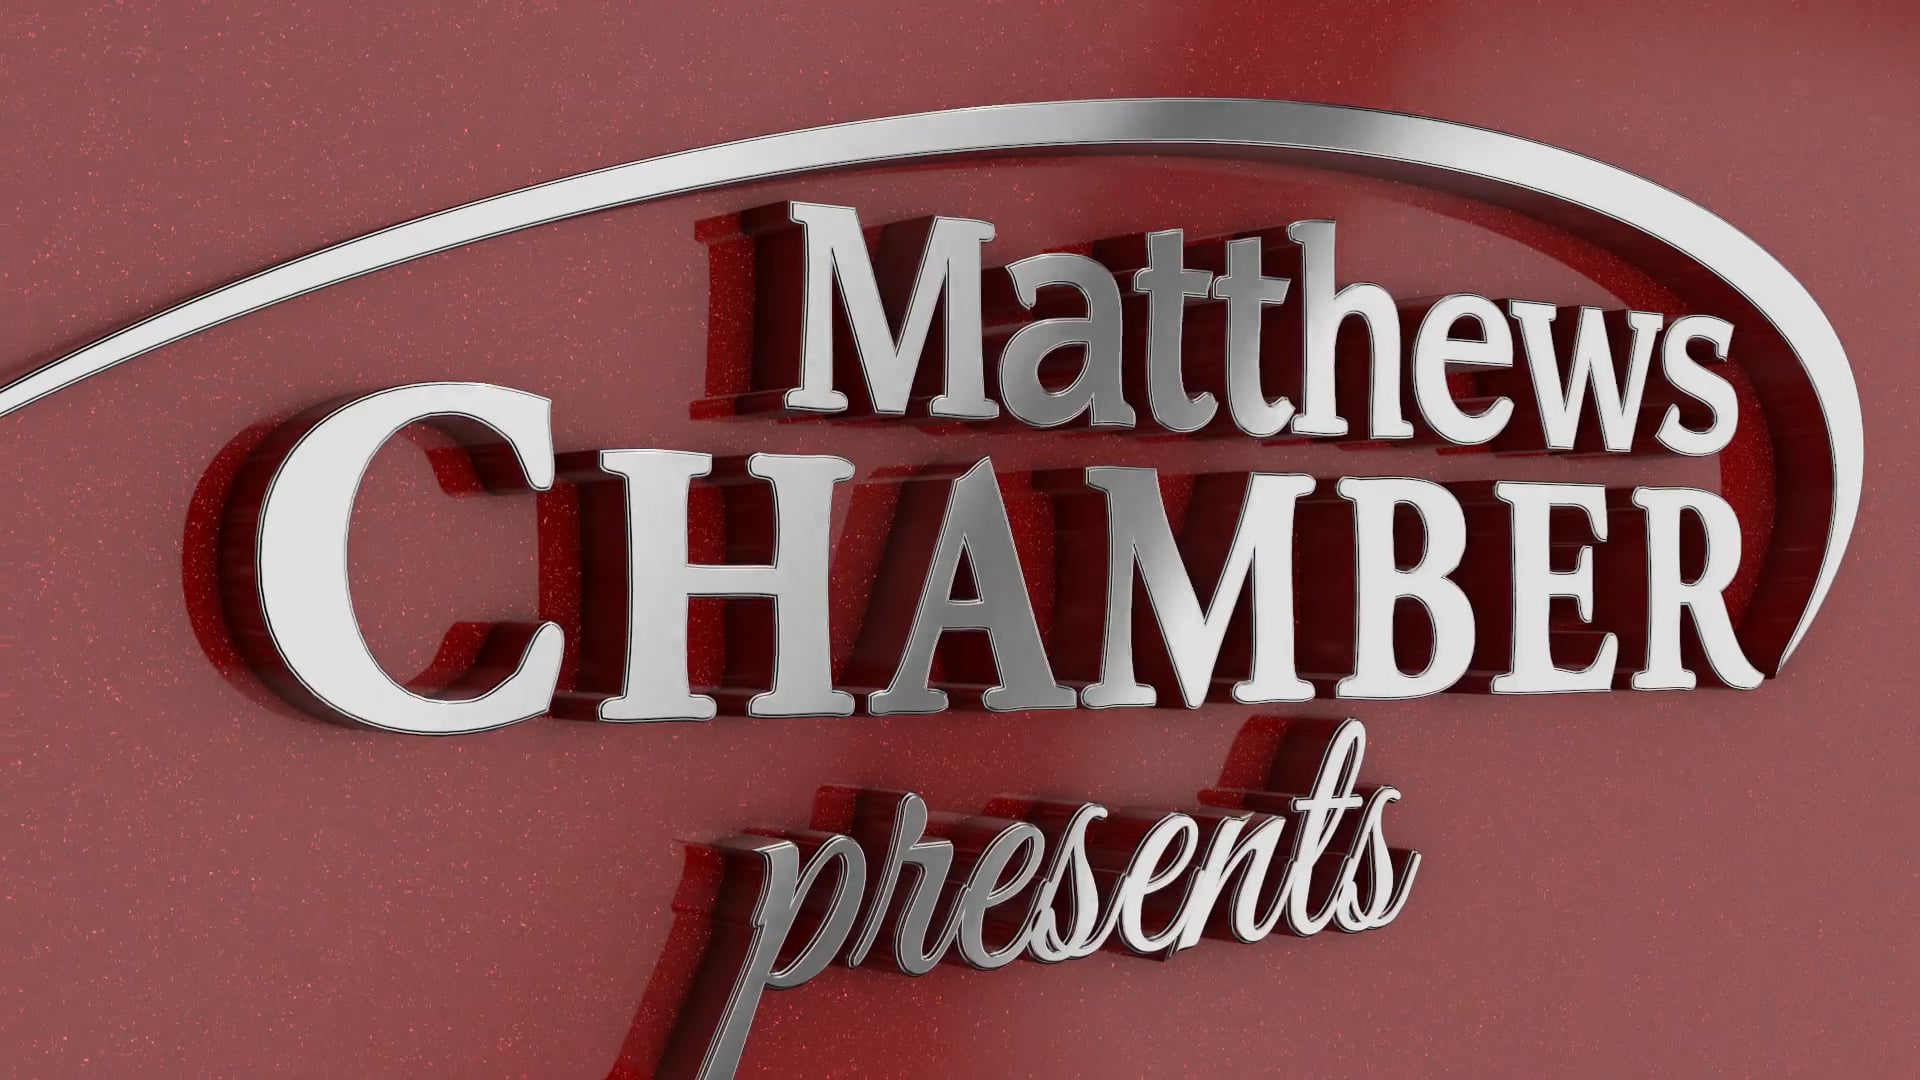 Matthews Chamber 2016 Auto Reunion and Motorcycle Show